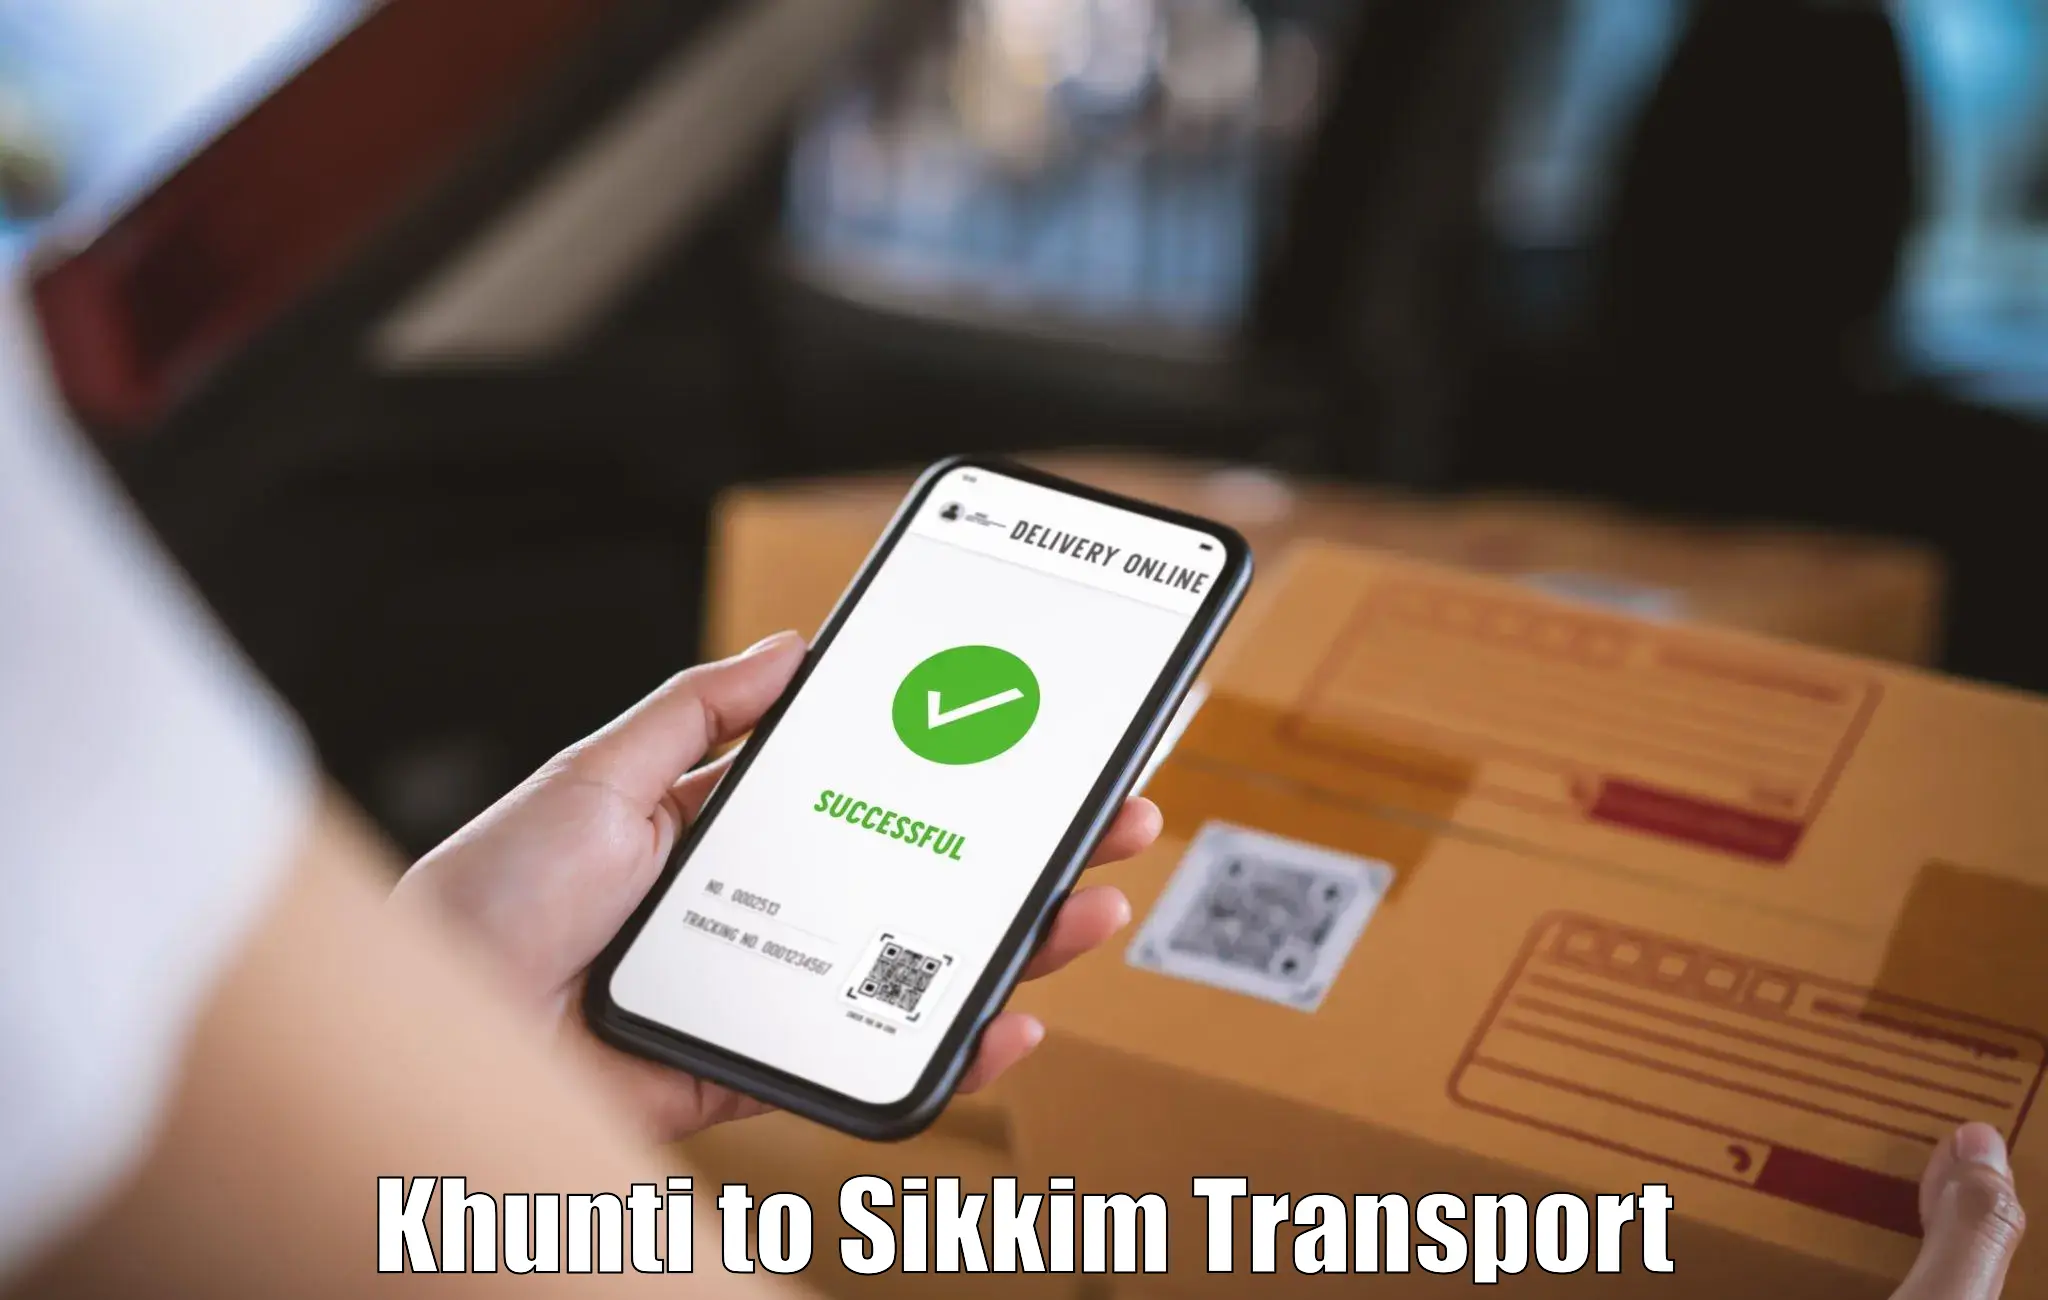 Interstate transport services Khunti to Pelling